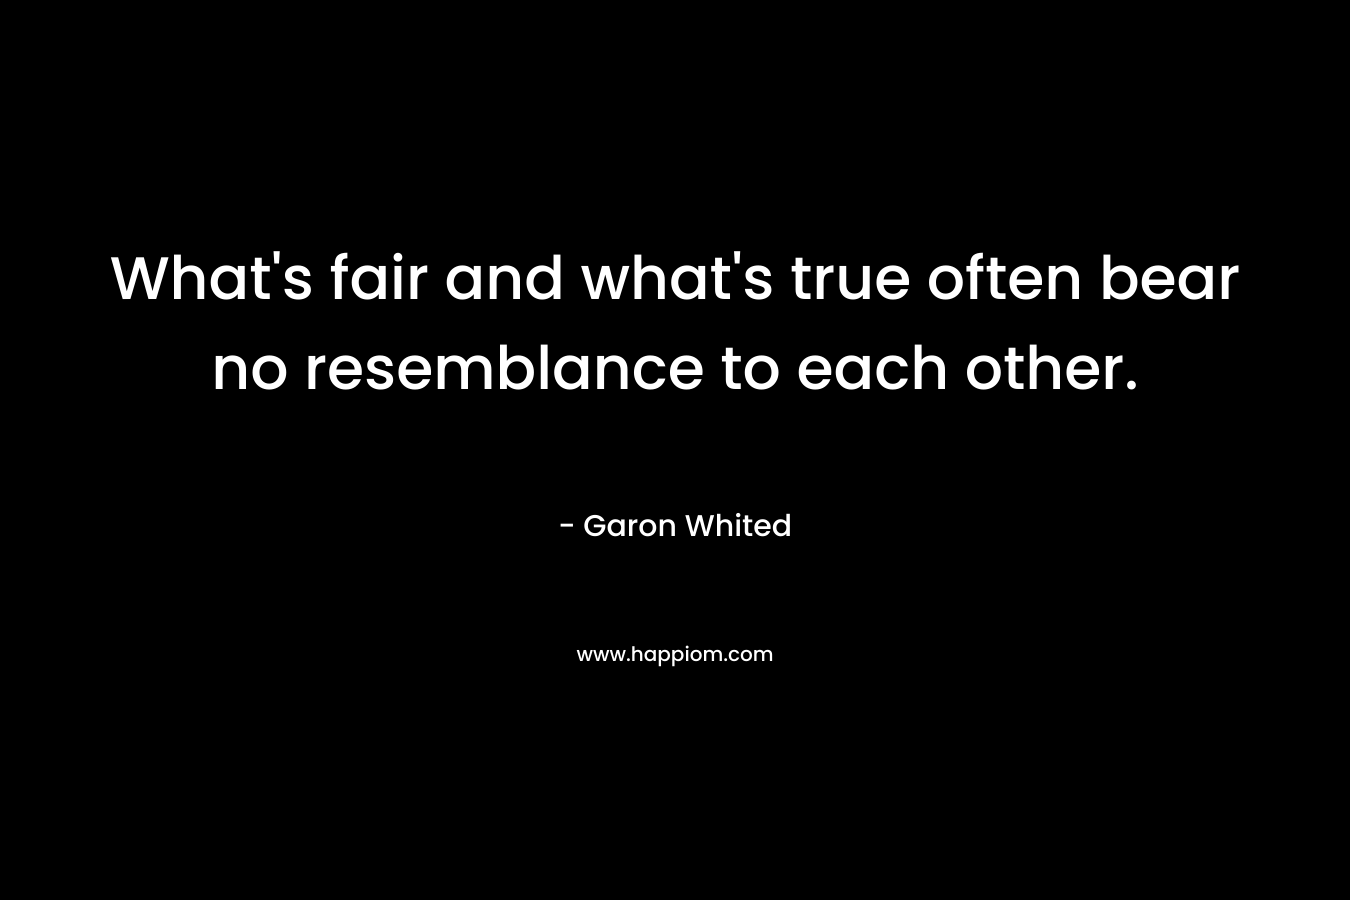 What’s fair and what’s true often bear no resemblance to each other. – Garon Whited